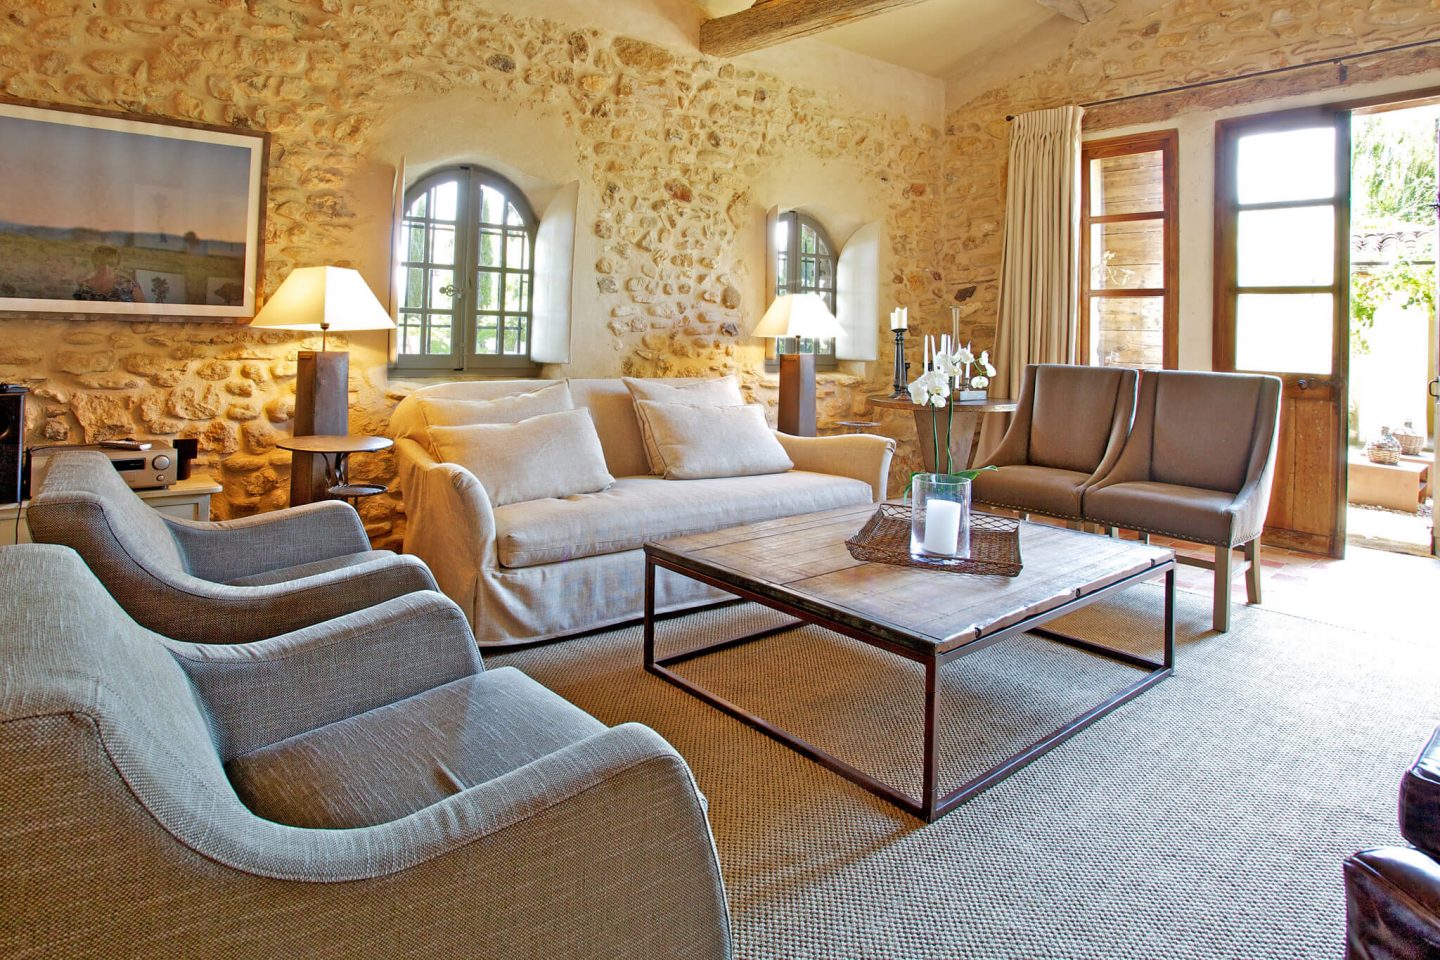 Provence French farmhouse known as Bonnieux Villa is a vacation rental from Haven In and offers inspiring gardens, romantic Old World rustic elegance, and interior design inspiration from the South of France!